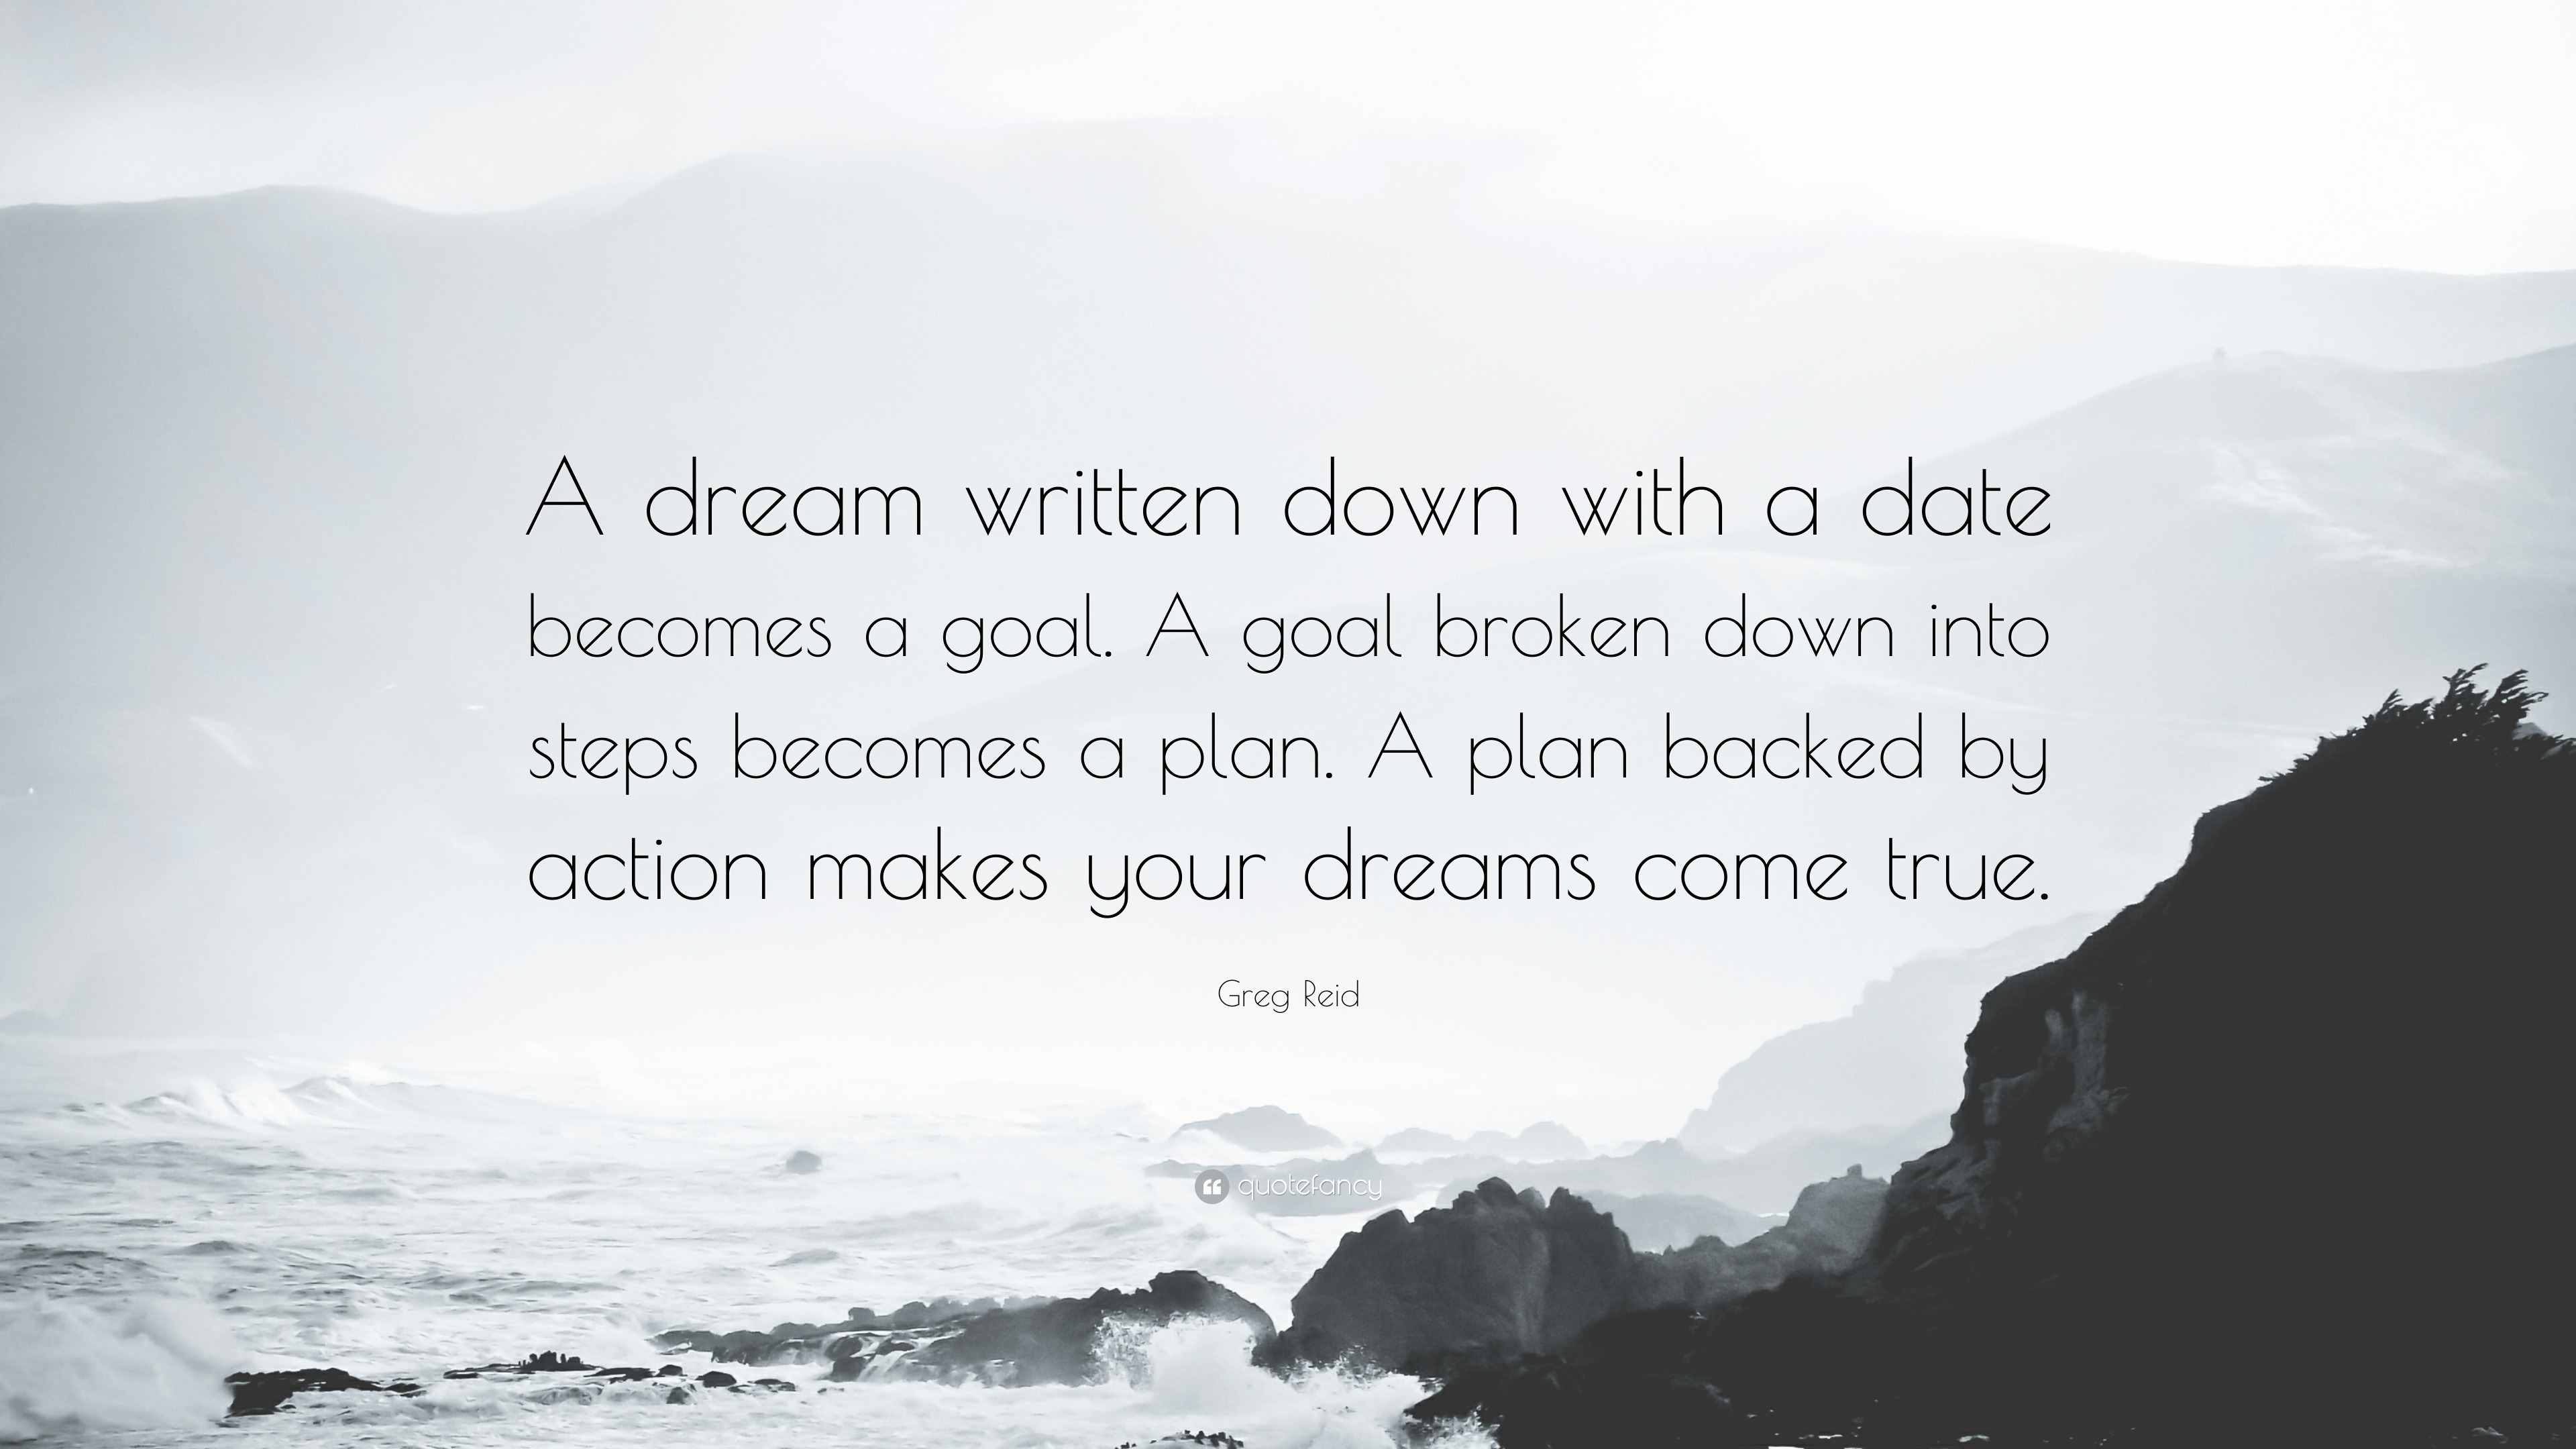 Inspirational motivating quote. Dream big, set goal, take action. - Stock  Image - Everypixel